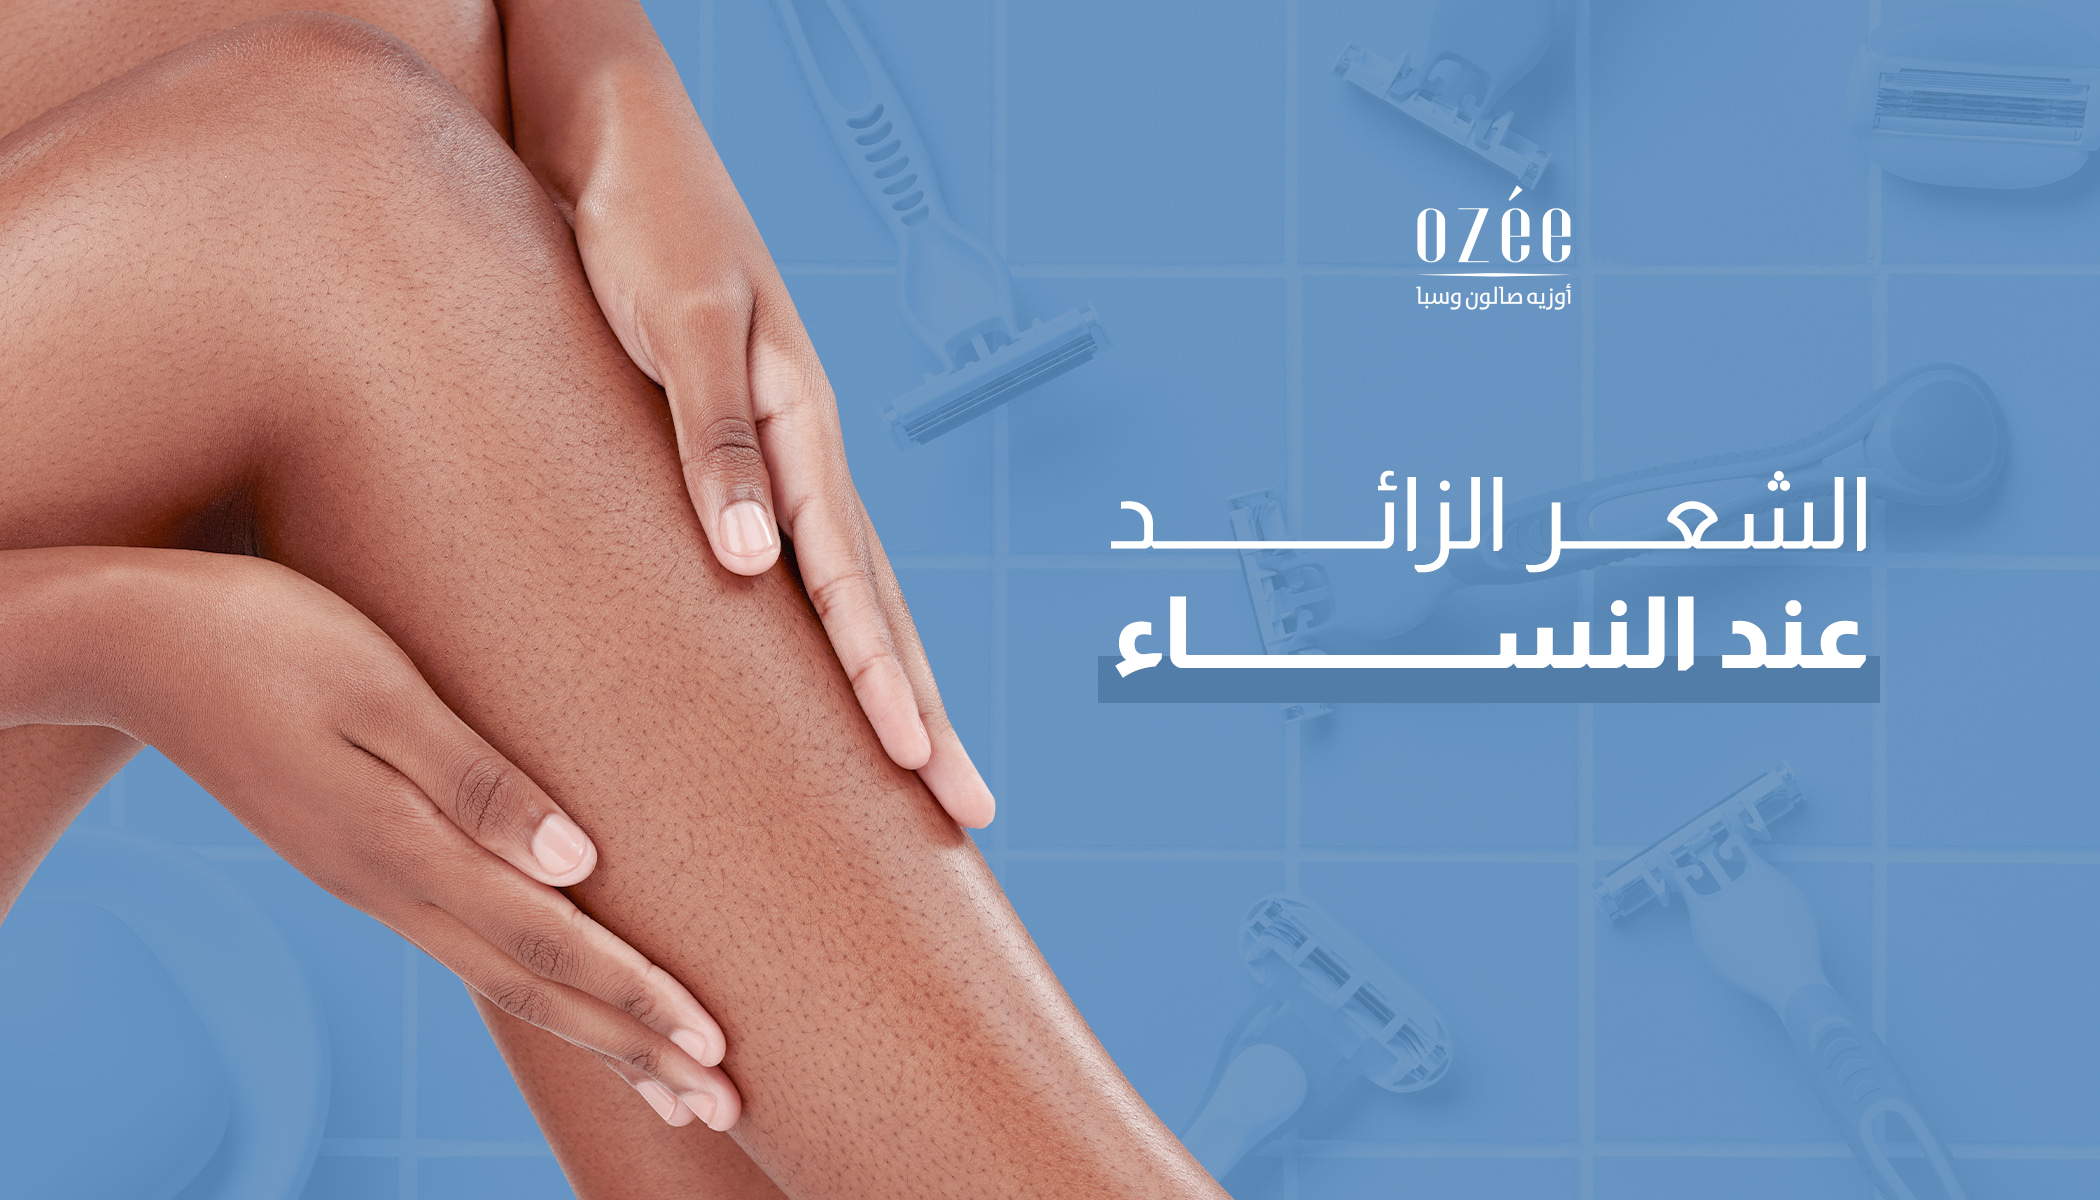 Your comprehensive guide to nail care 2023